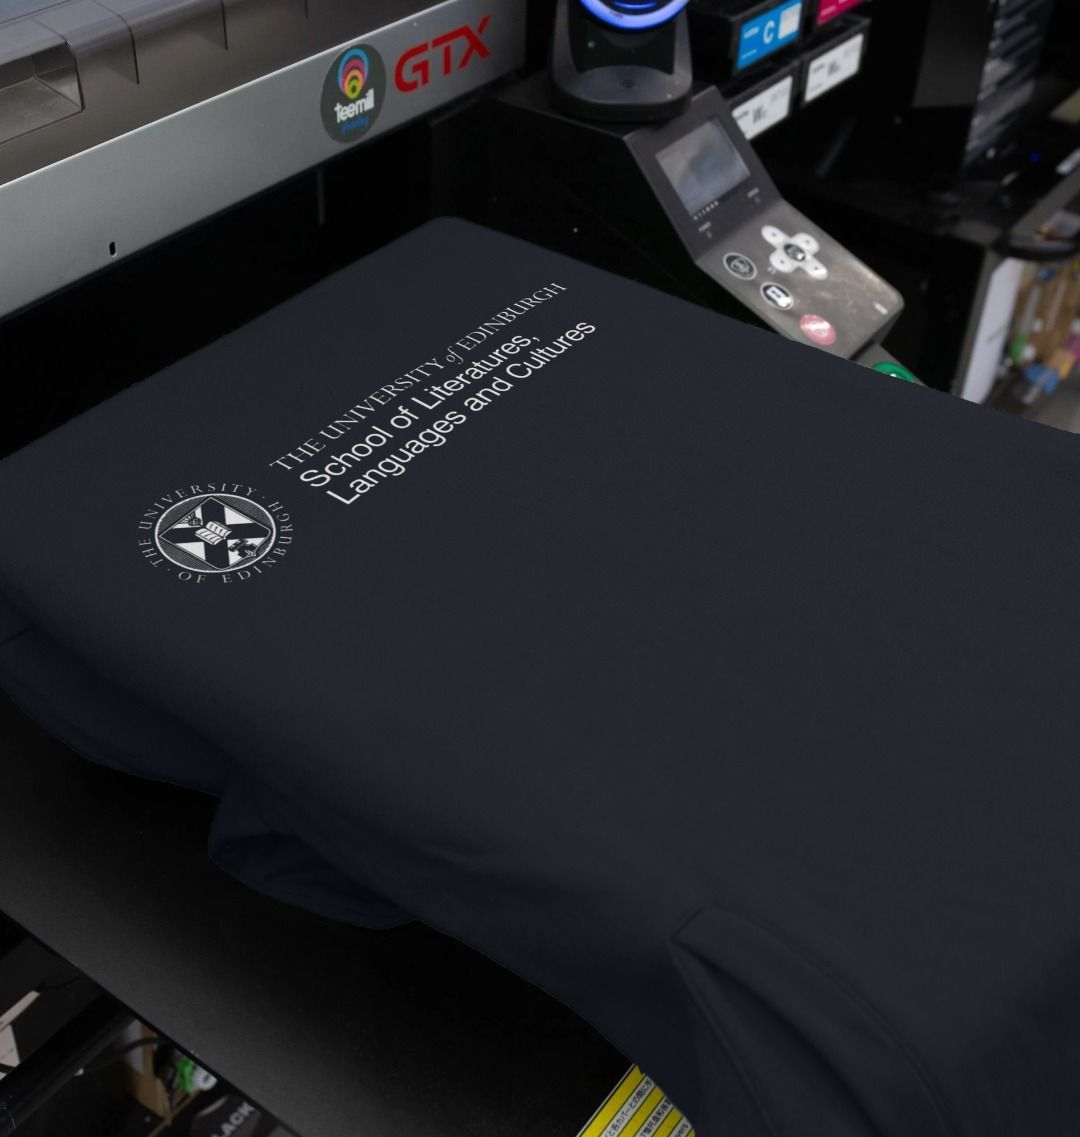 Our School of Literatures, Languages and Cultures  Hoodie being printed by our print on demand partner, teemill.